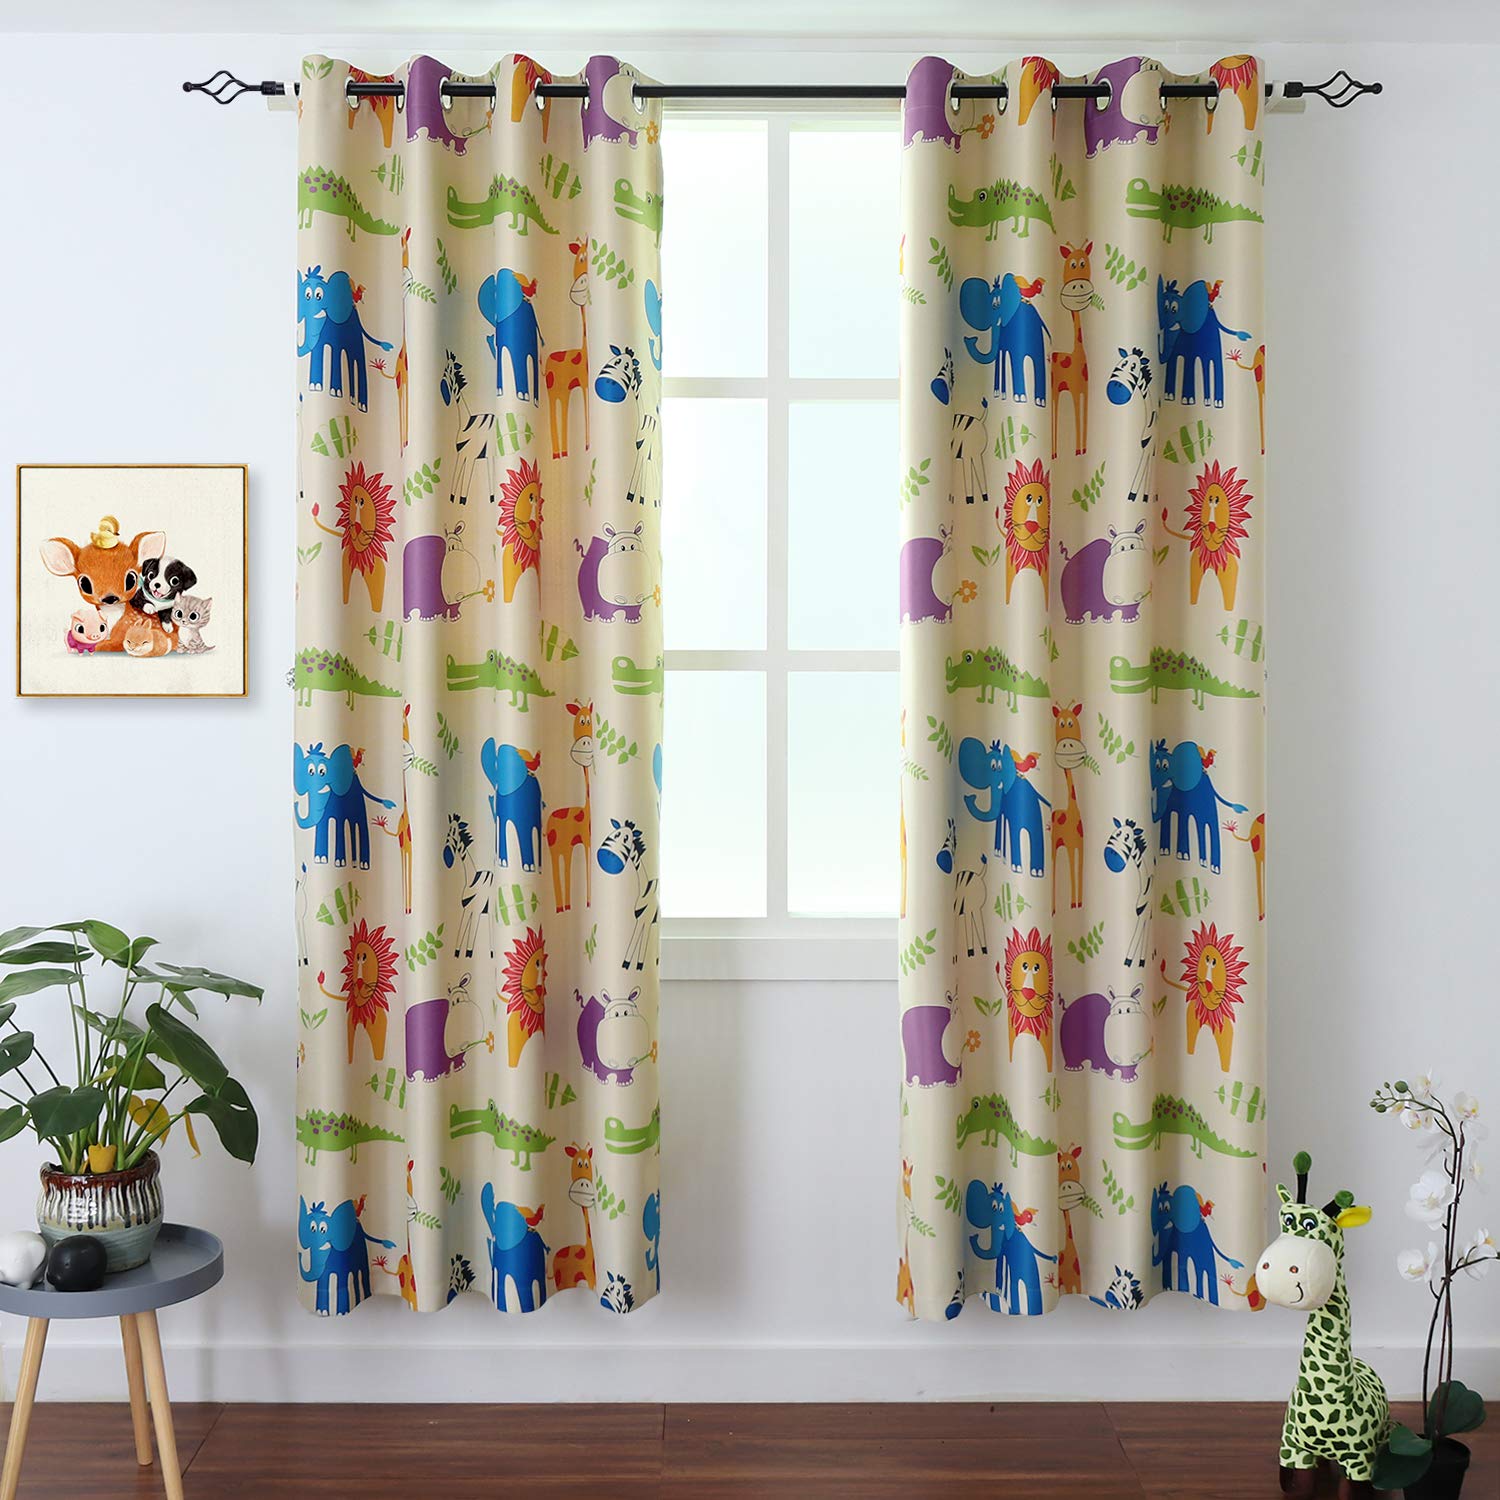 BGment Kids Blackout Curtains - Grommet Thermal Insulated Room Darkening Printed Animal Zoo